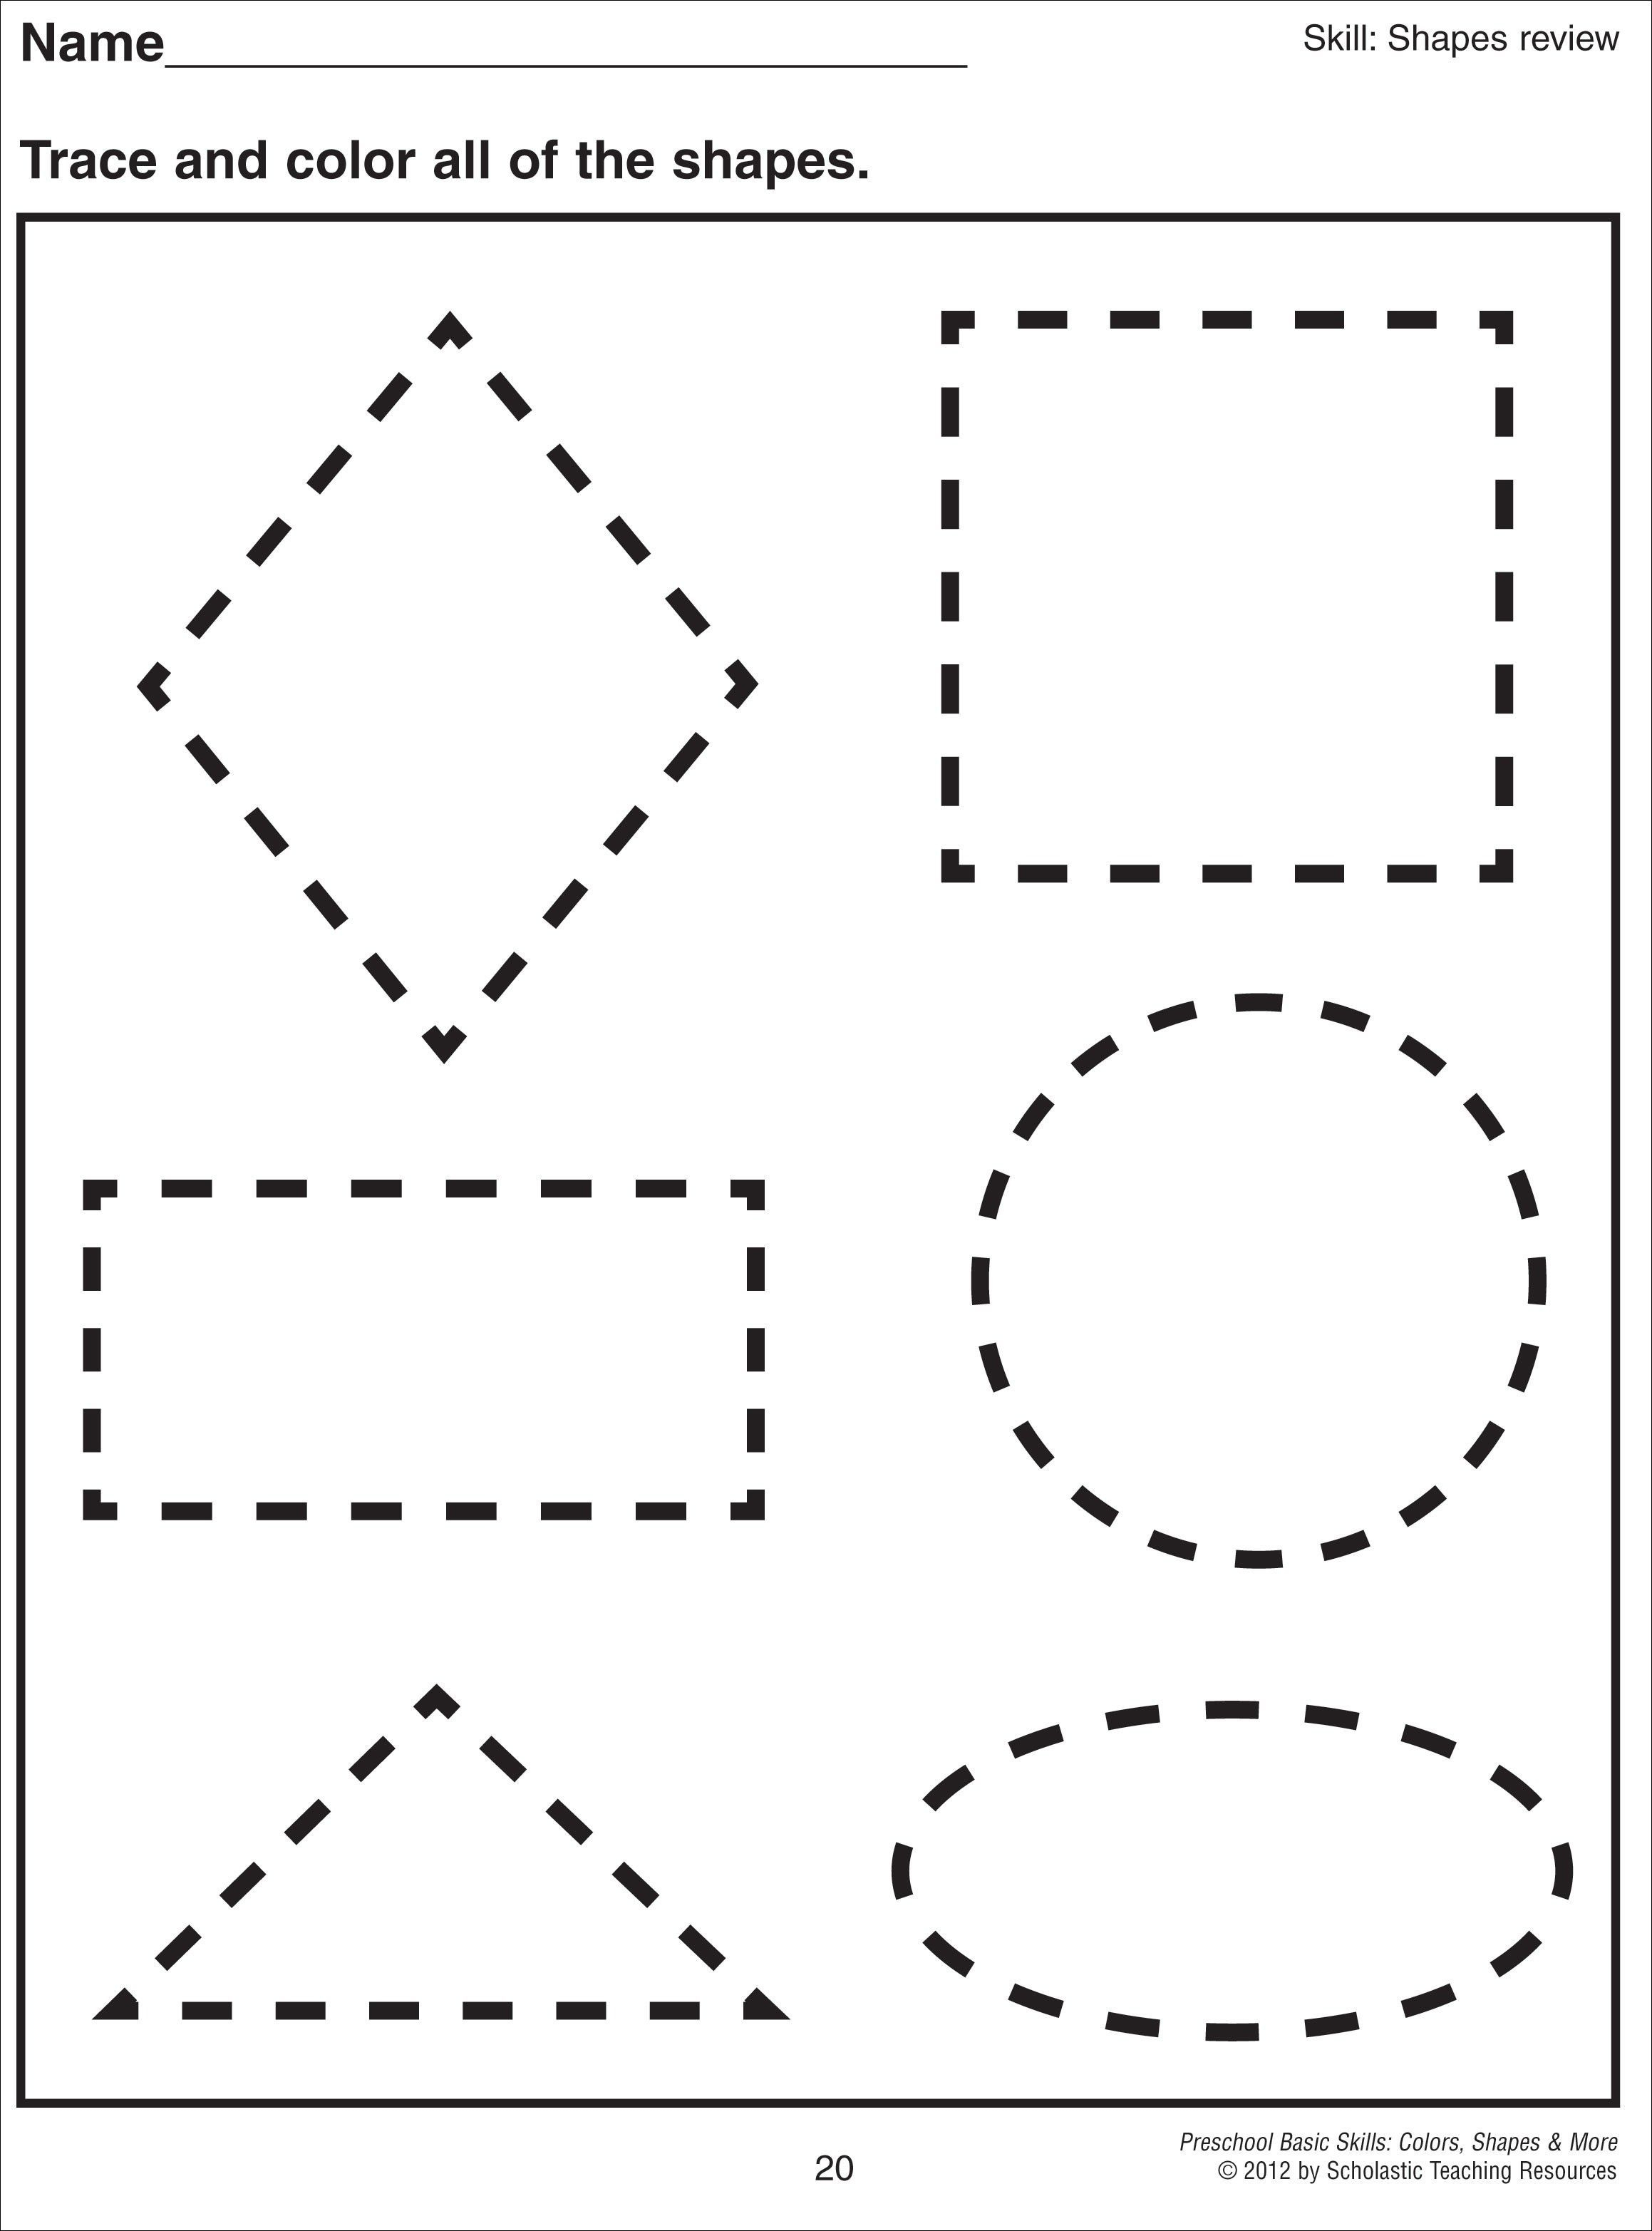 Free Printable Shapes Worksheets For Kindergartenol Gifolers - Free Printable Shapes Worksheets